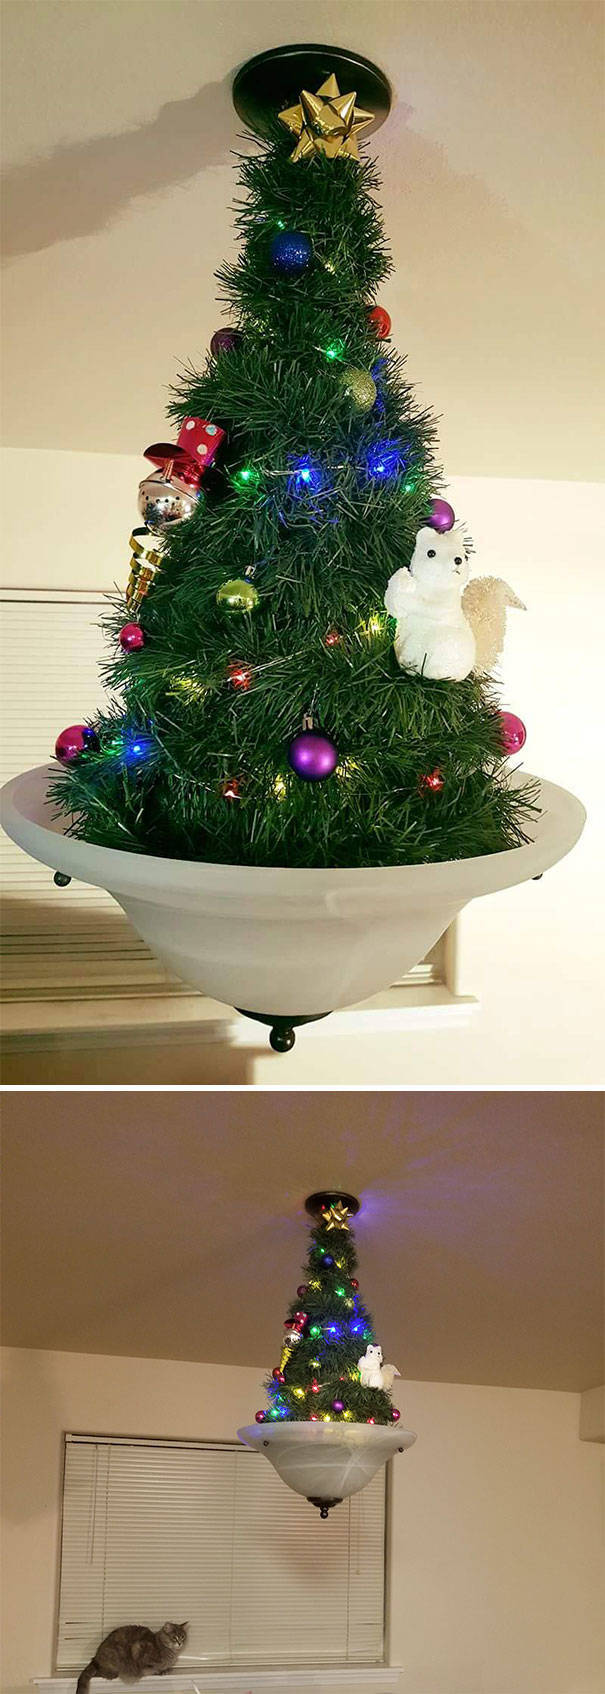 Christmas Trees Shouldn’t All Look The Same!